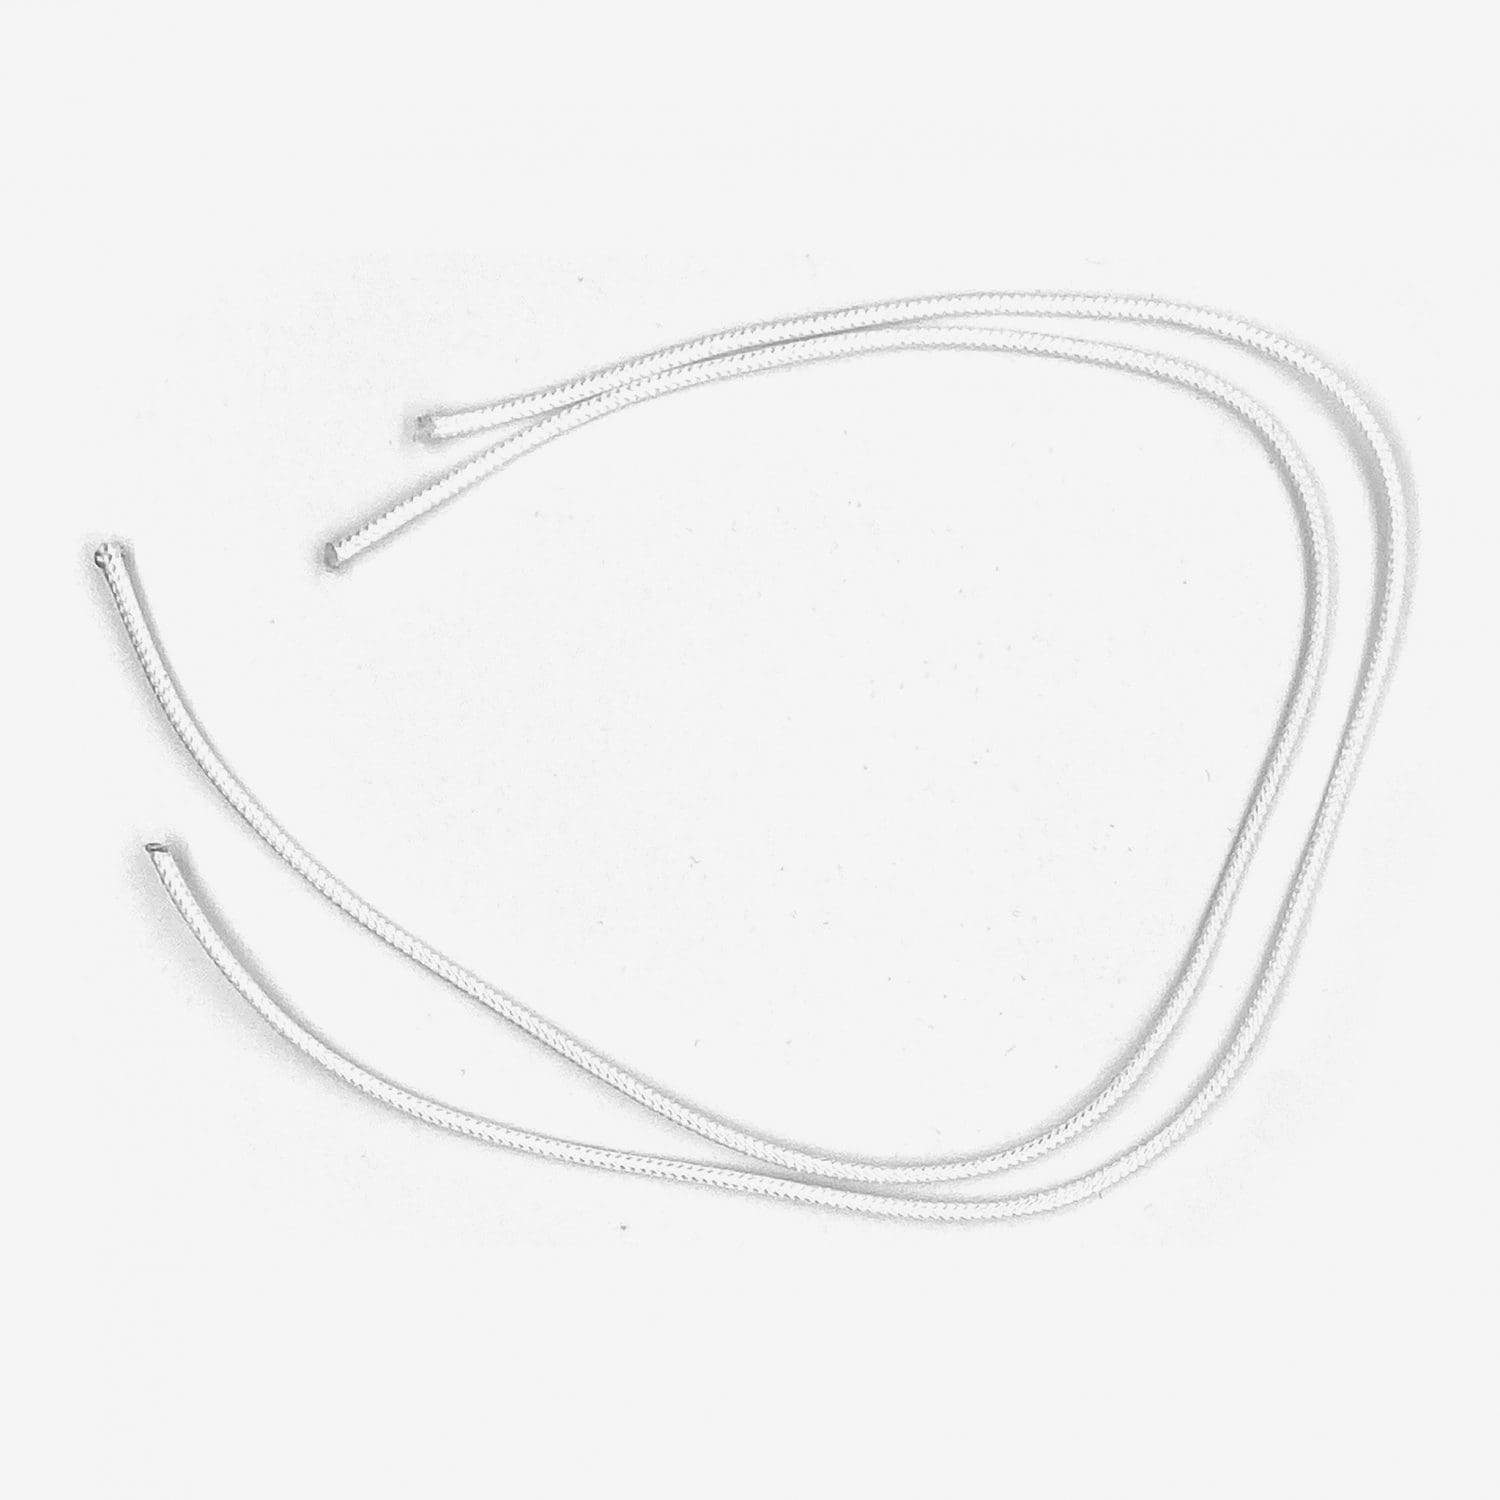 2-Pack Snare Cords